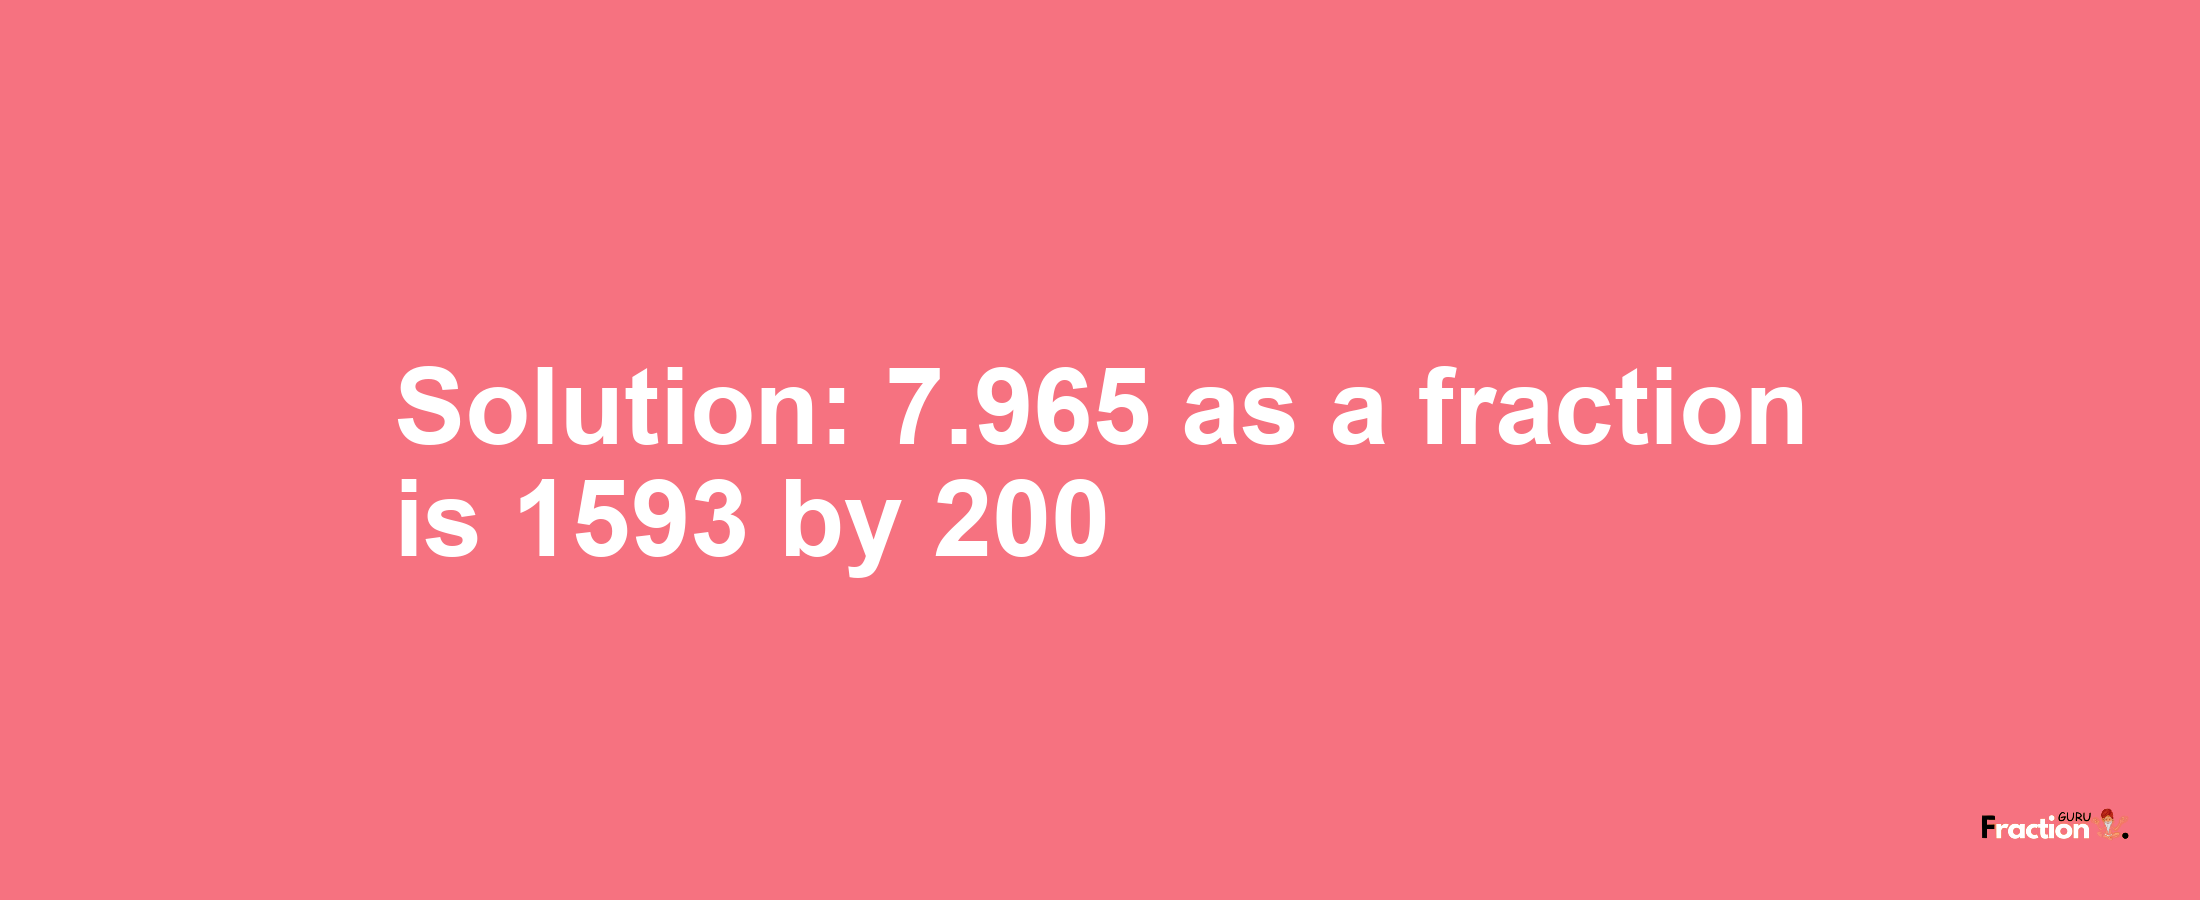 Solution:7.965 as a fraction is 1593/200